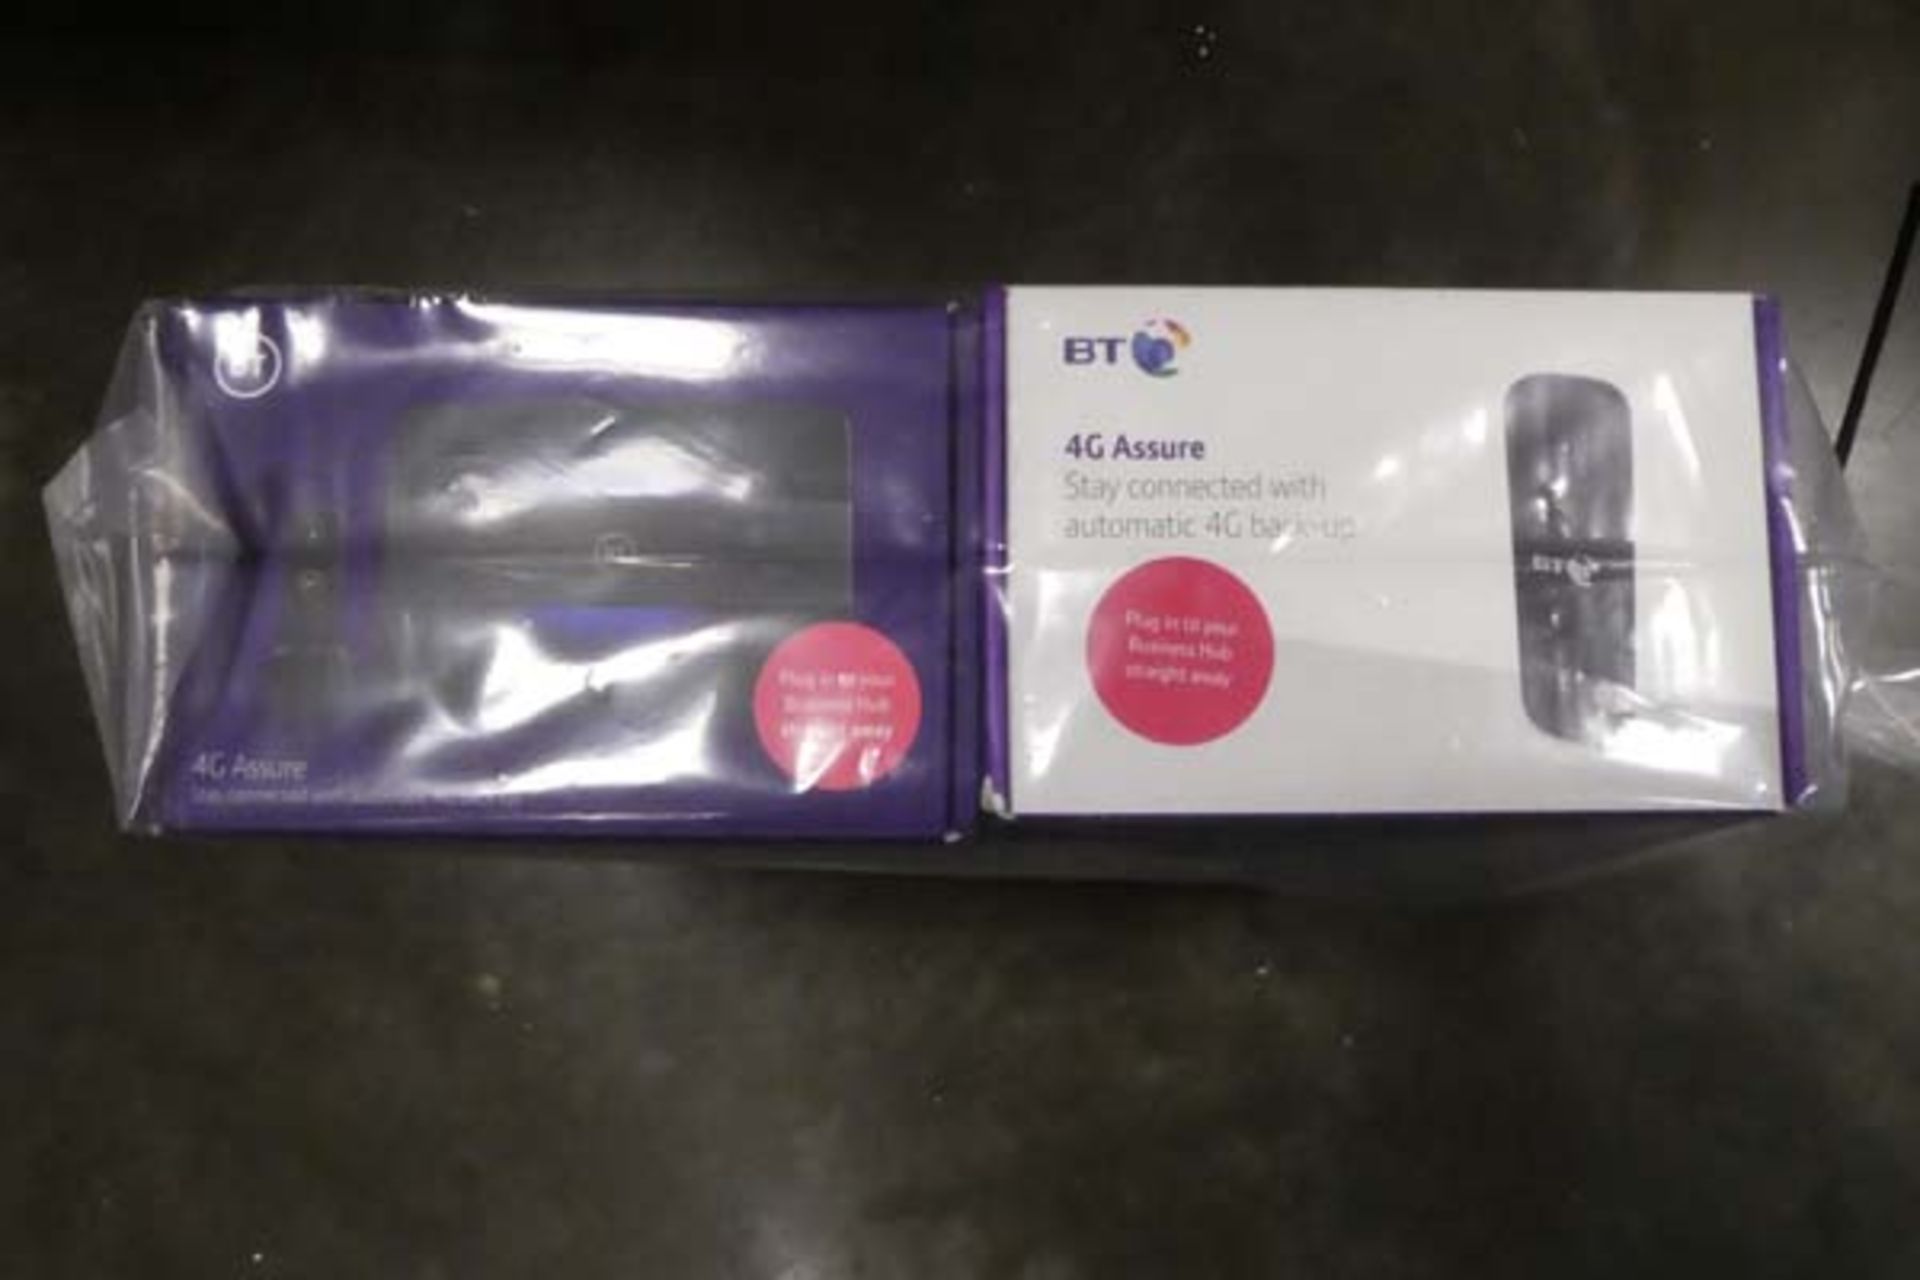 Bag containing 18x BT 4G Assure dongles